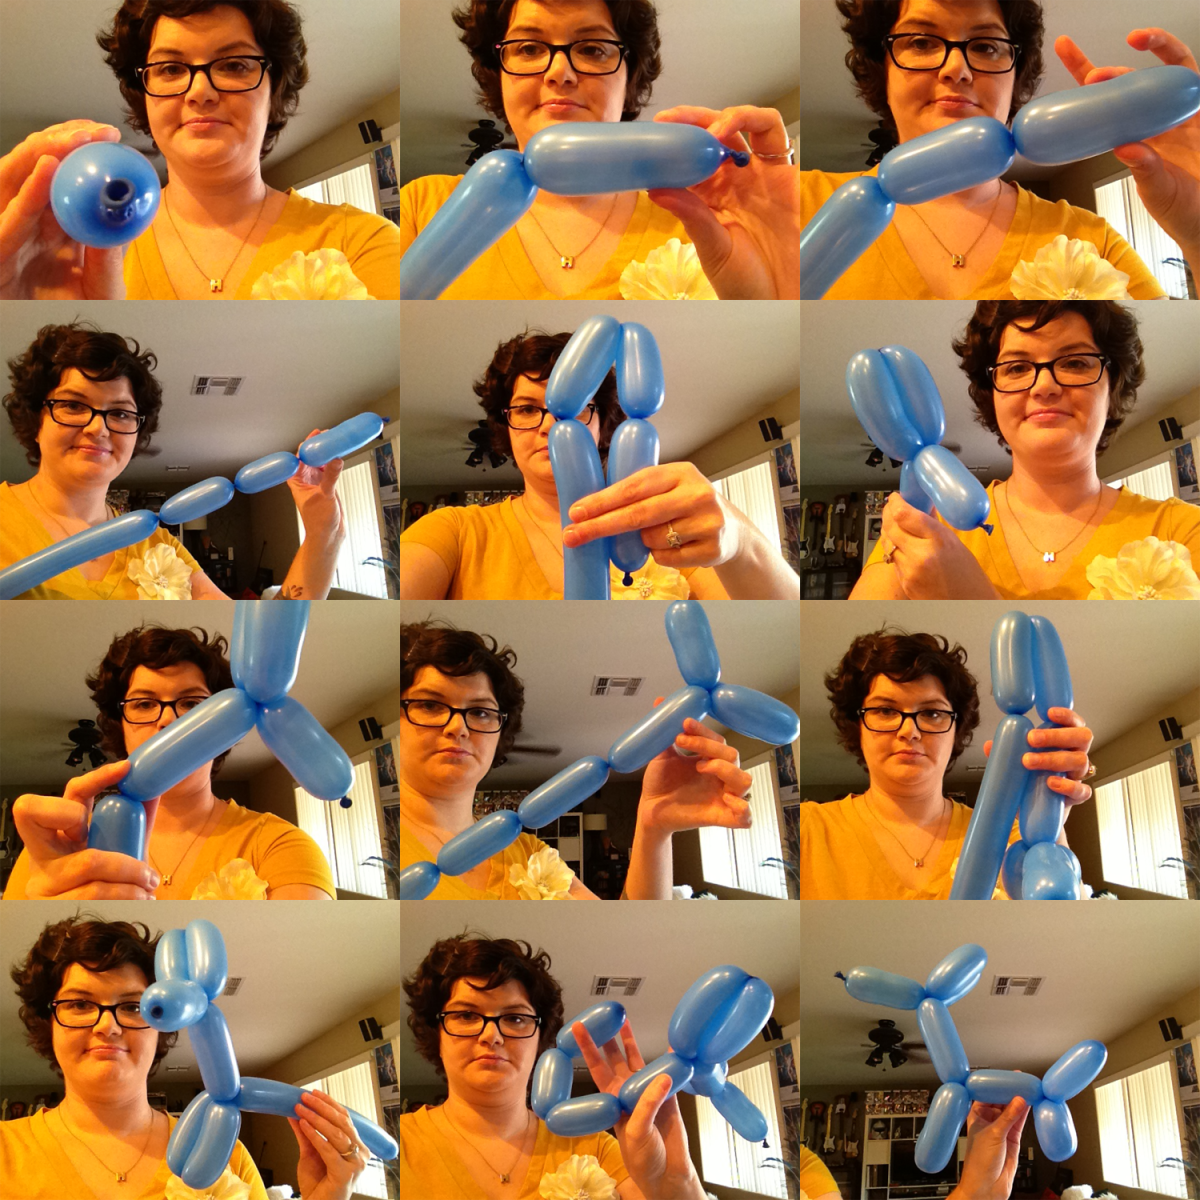 How to make easy balloon animals, step by step.